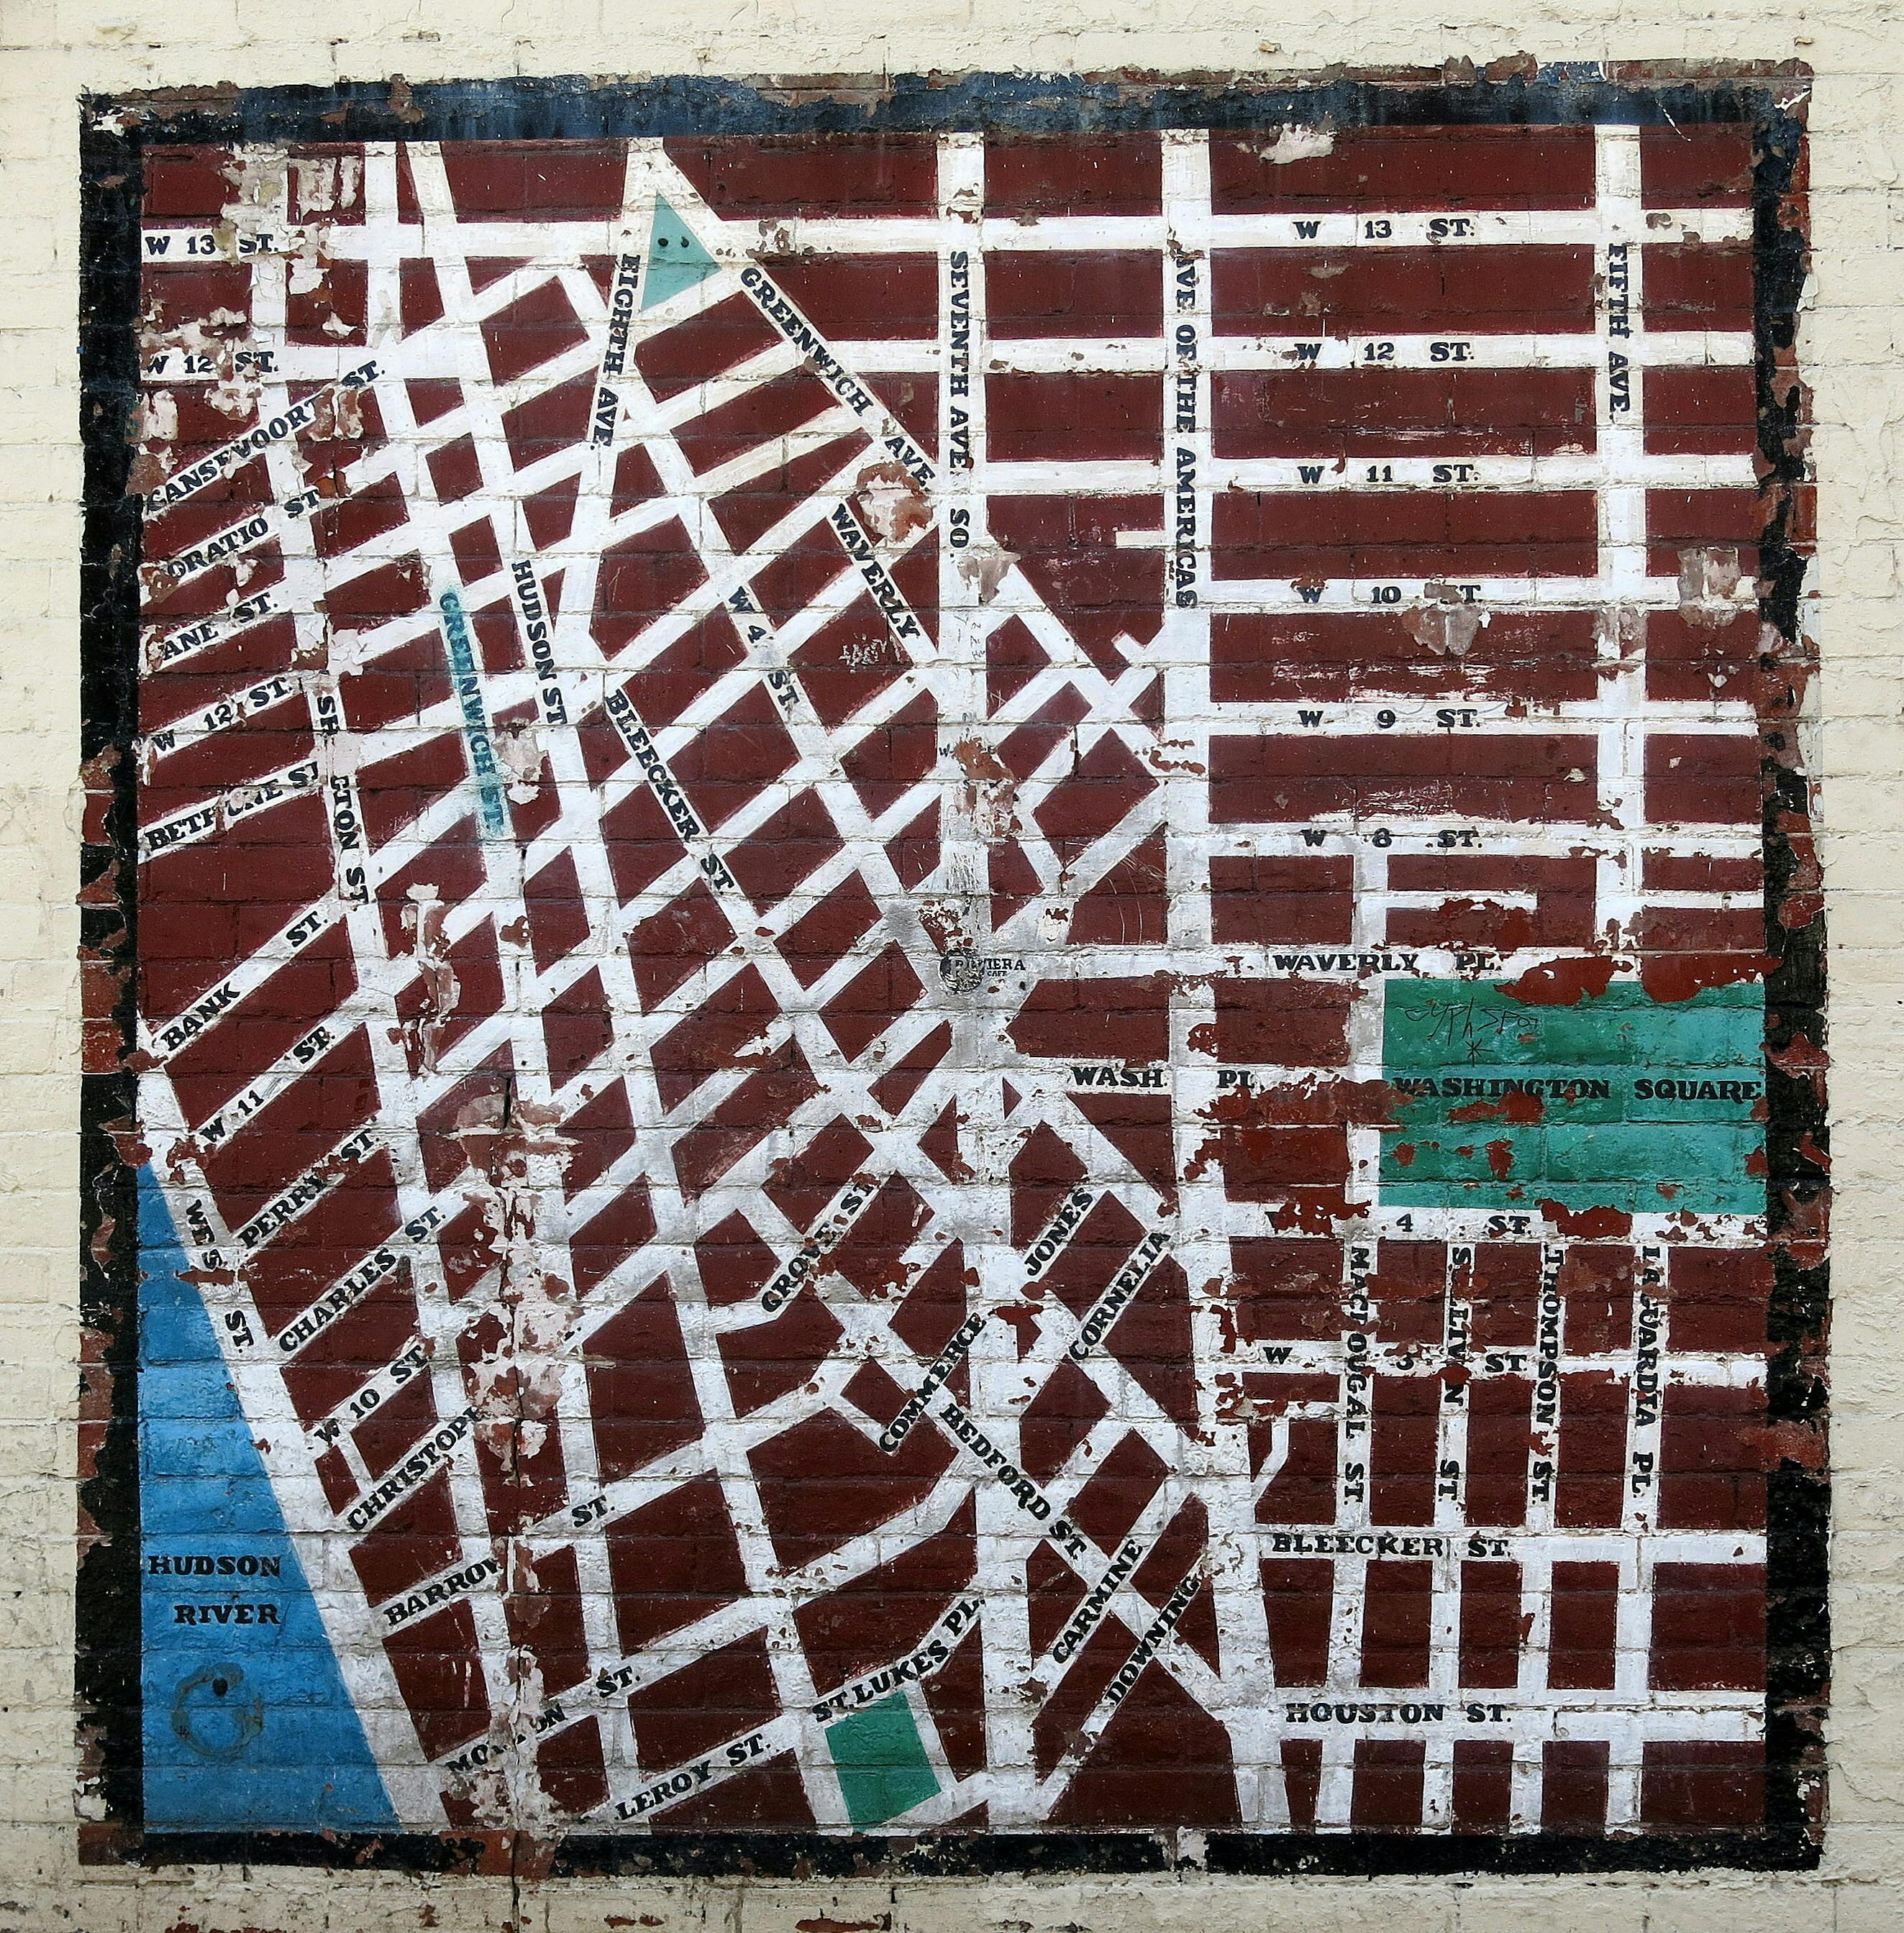 A map of Greenwich Village A mural on W 10th Street between 7th Ave and W 4th St New York City 17107568868